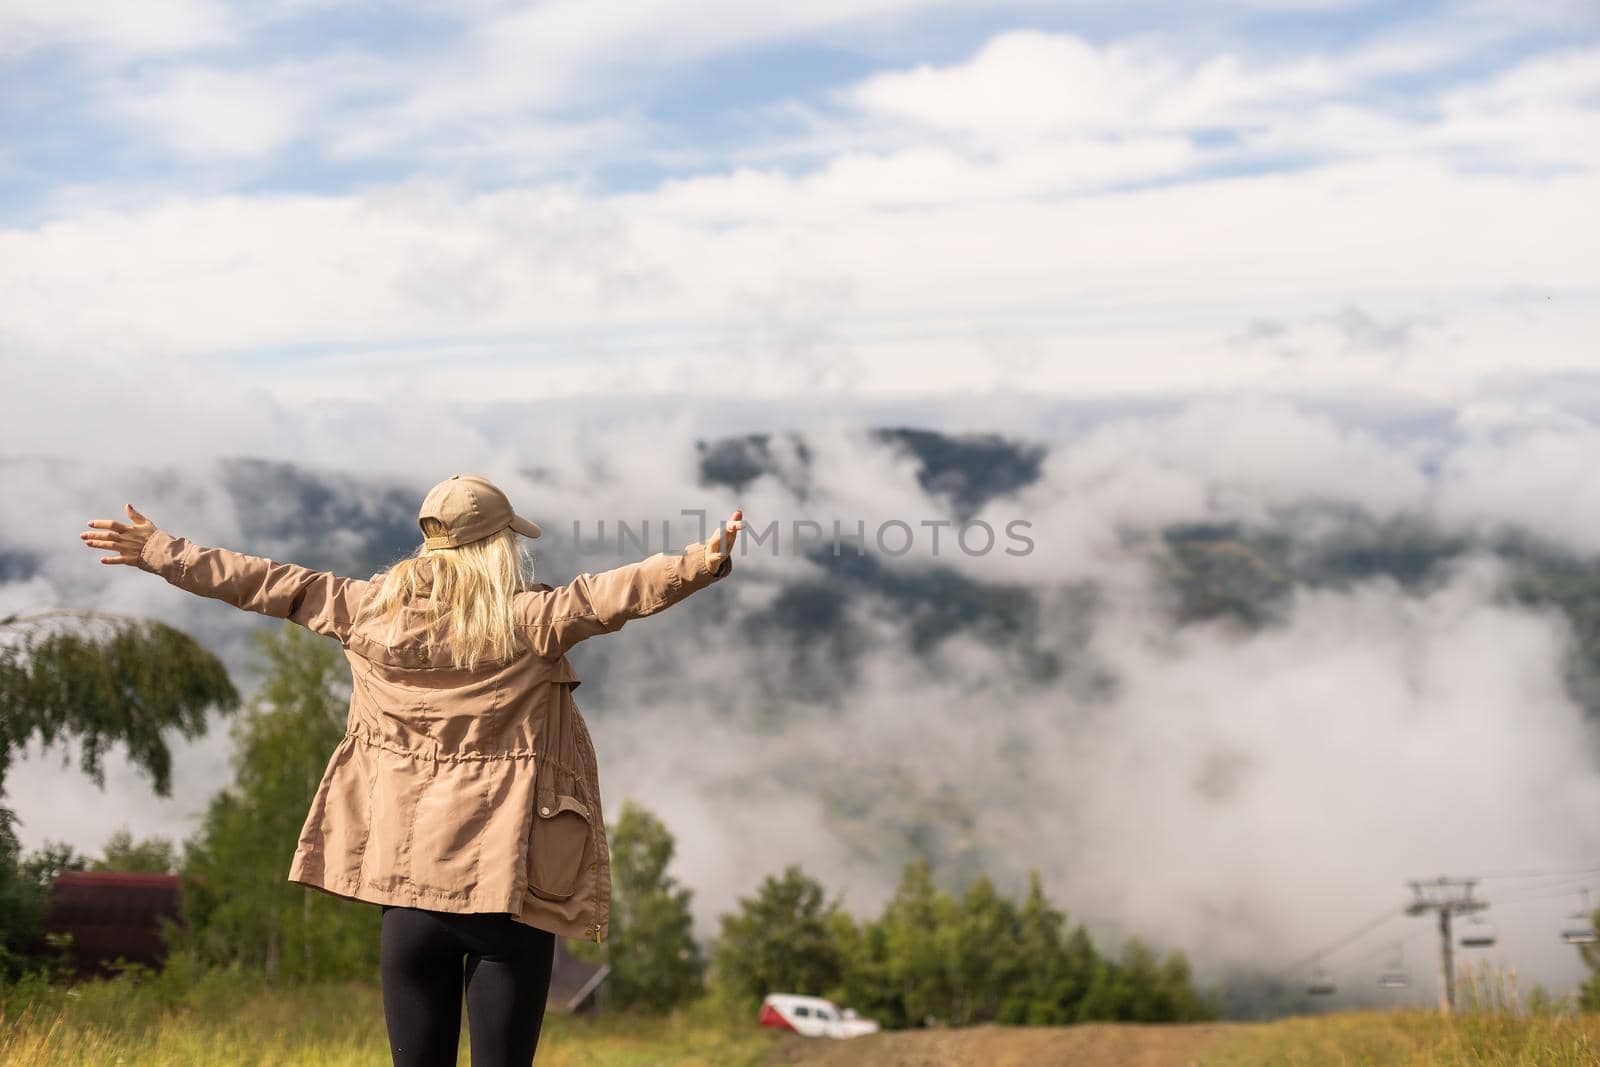 woman backpacker enjoy the view at mountain.